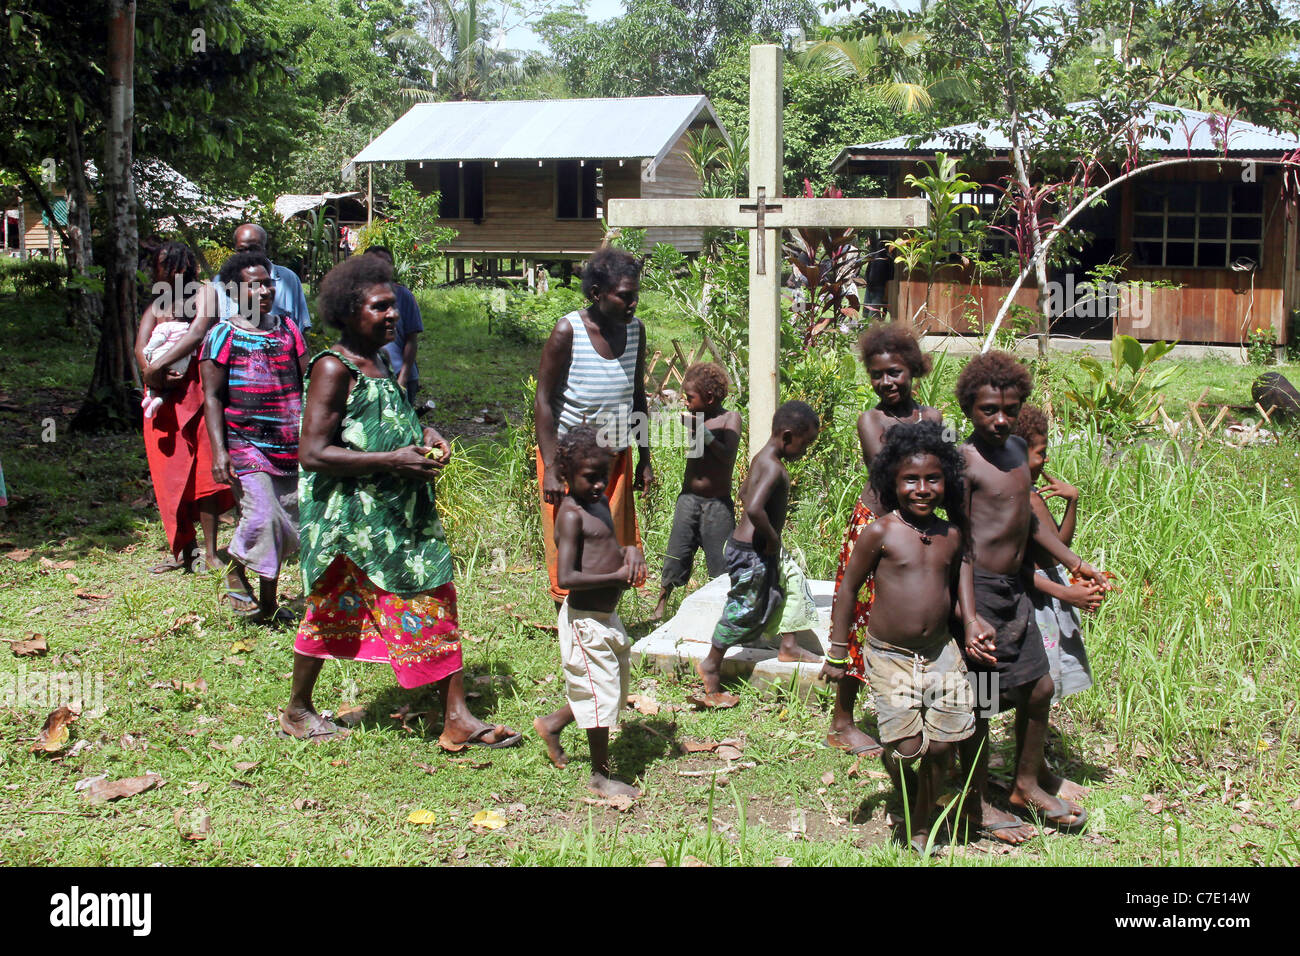 People in a village on Bougainville Island, Papua New Guinea Stock Photo